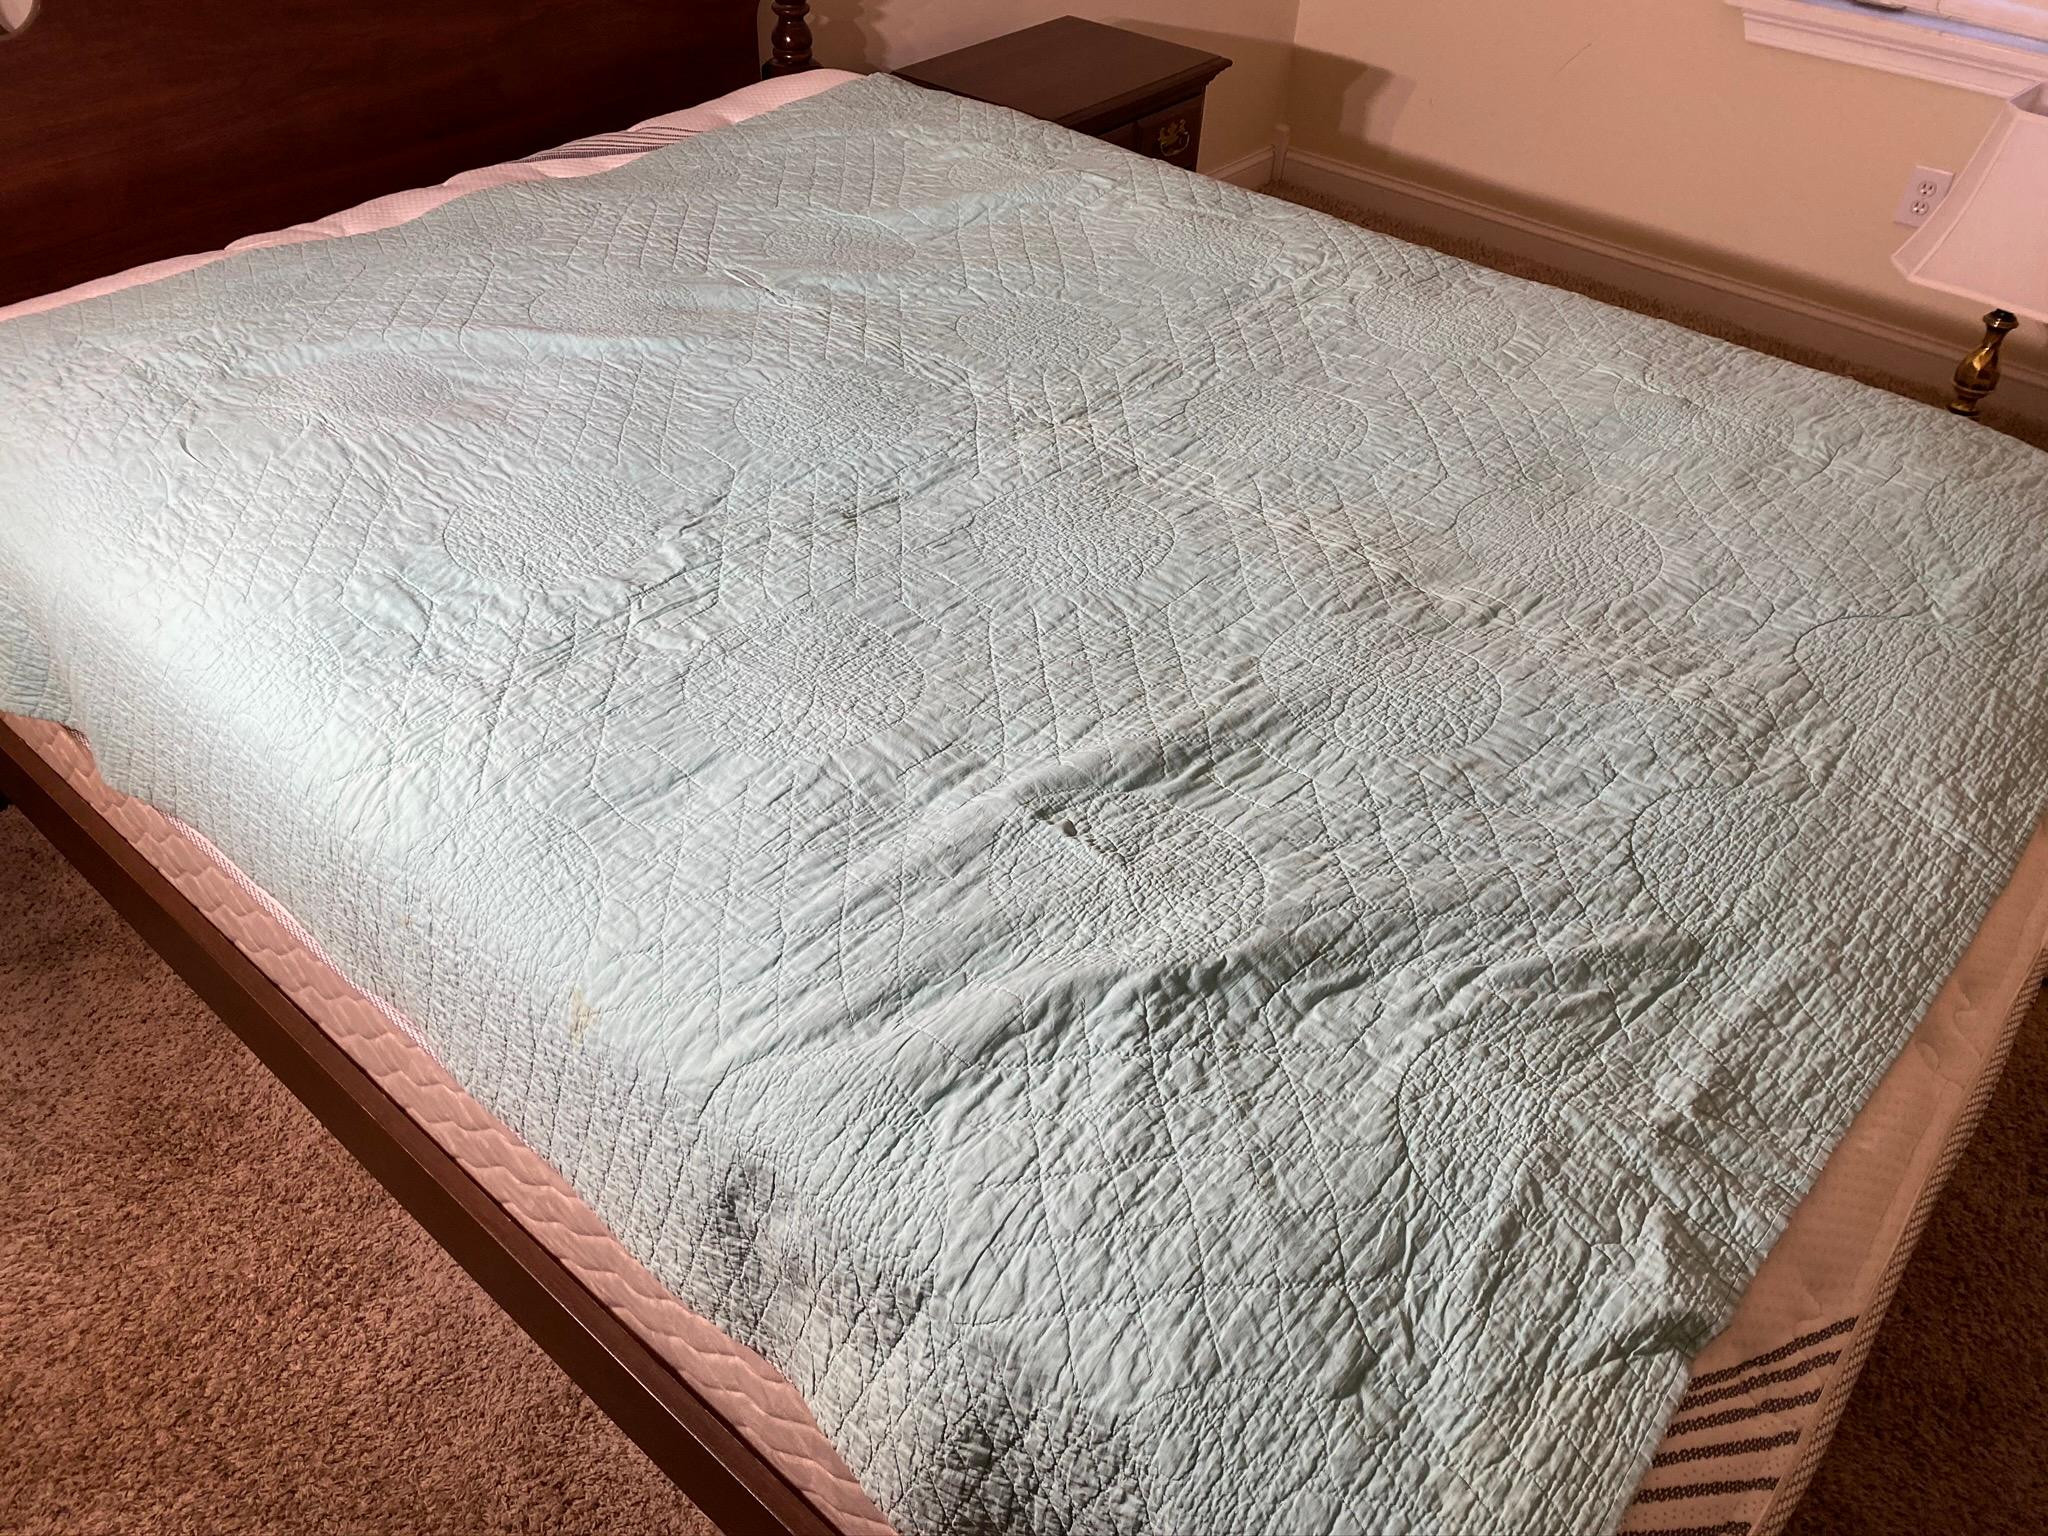 Antique Blue Quilt with Diamonds - Hand Stitched